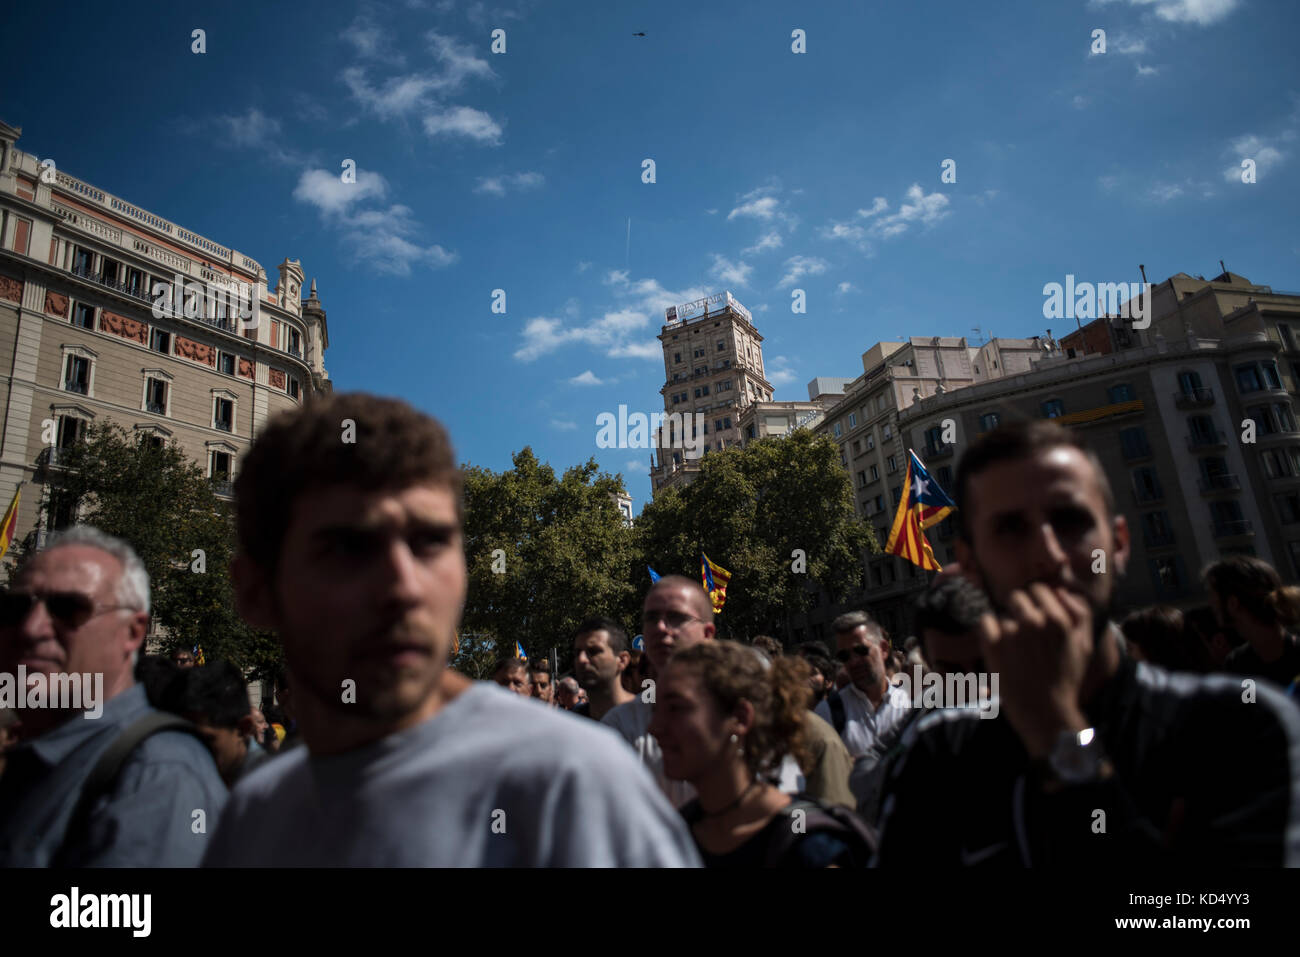 Demonstrators in front of the Conselleria d'Economia in Barcelona, the economy office of the catalan government. Credit: Alamy / Carles Desfilis Stock Photo